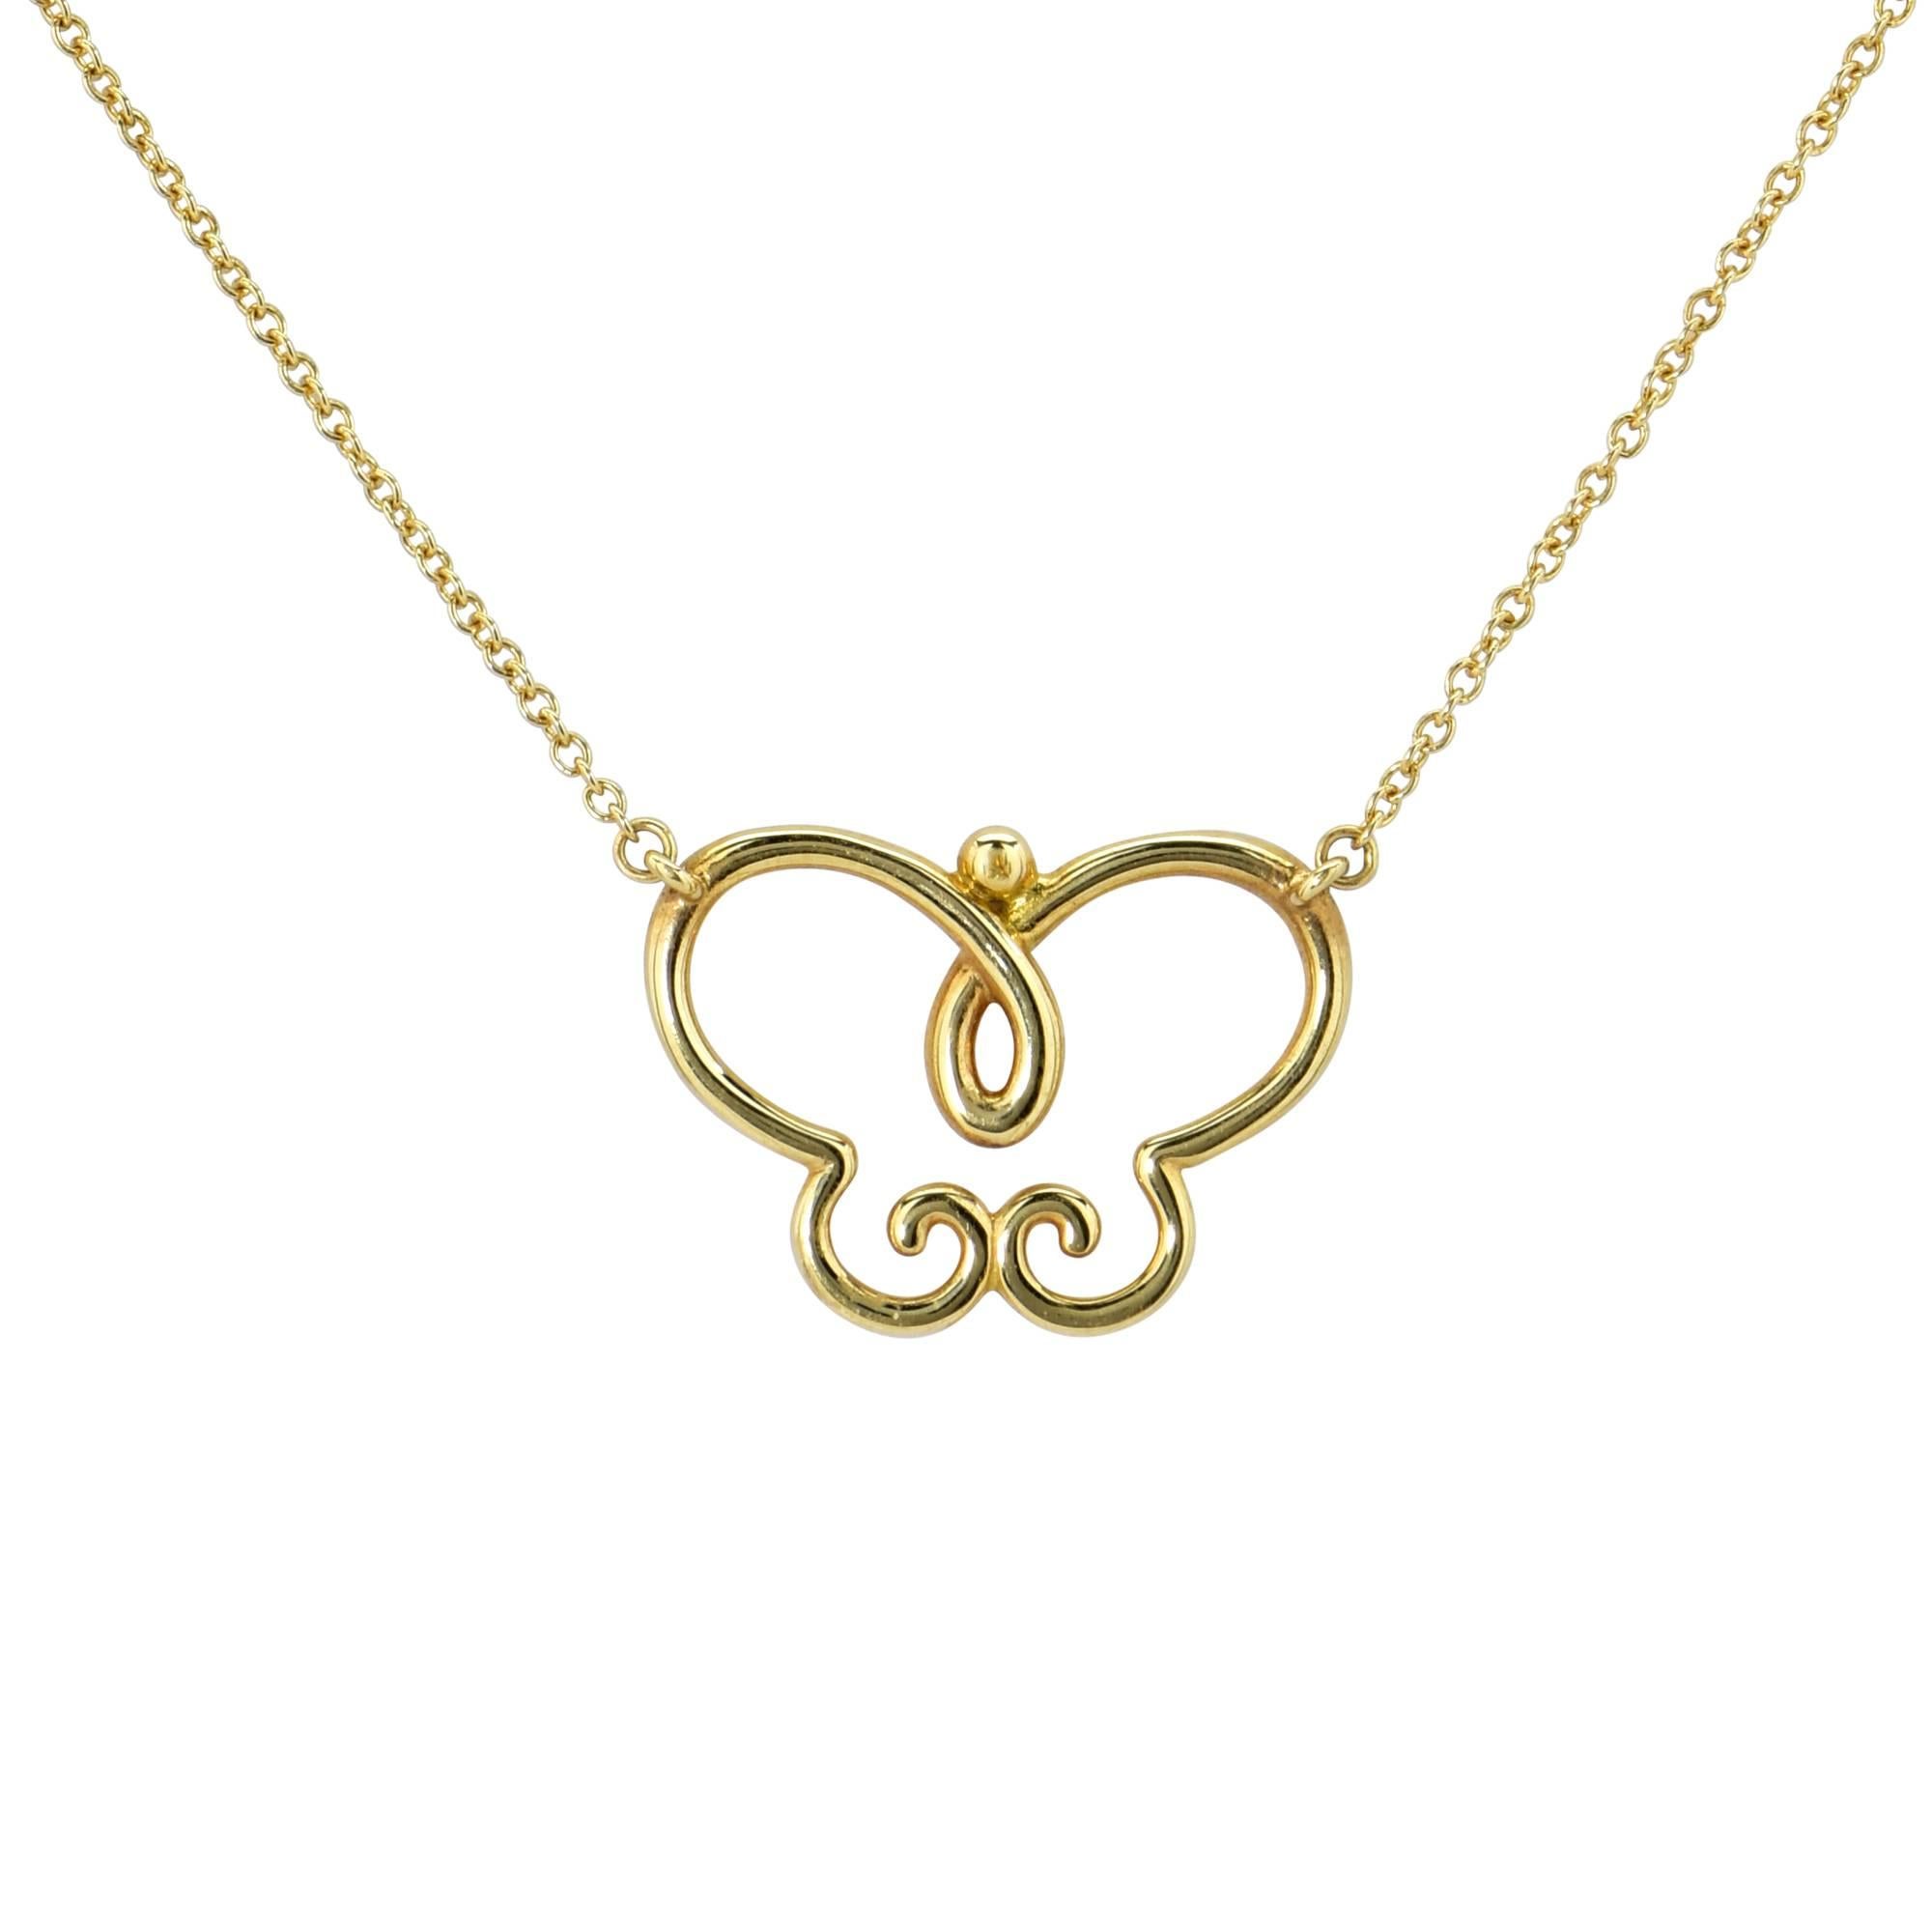 18k yellow gold Tiffany & Co. Picasso gold Villa Paloma butterfly necklace.

This gorgeous necklace is suspended from a 16 inch chain, the pendant measures .76 inch in width by .55 inch in height.
The necklace and pendant weighs 3 grams.

This